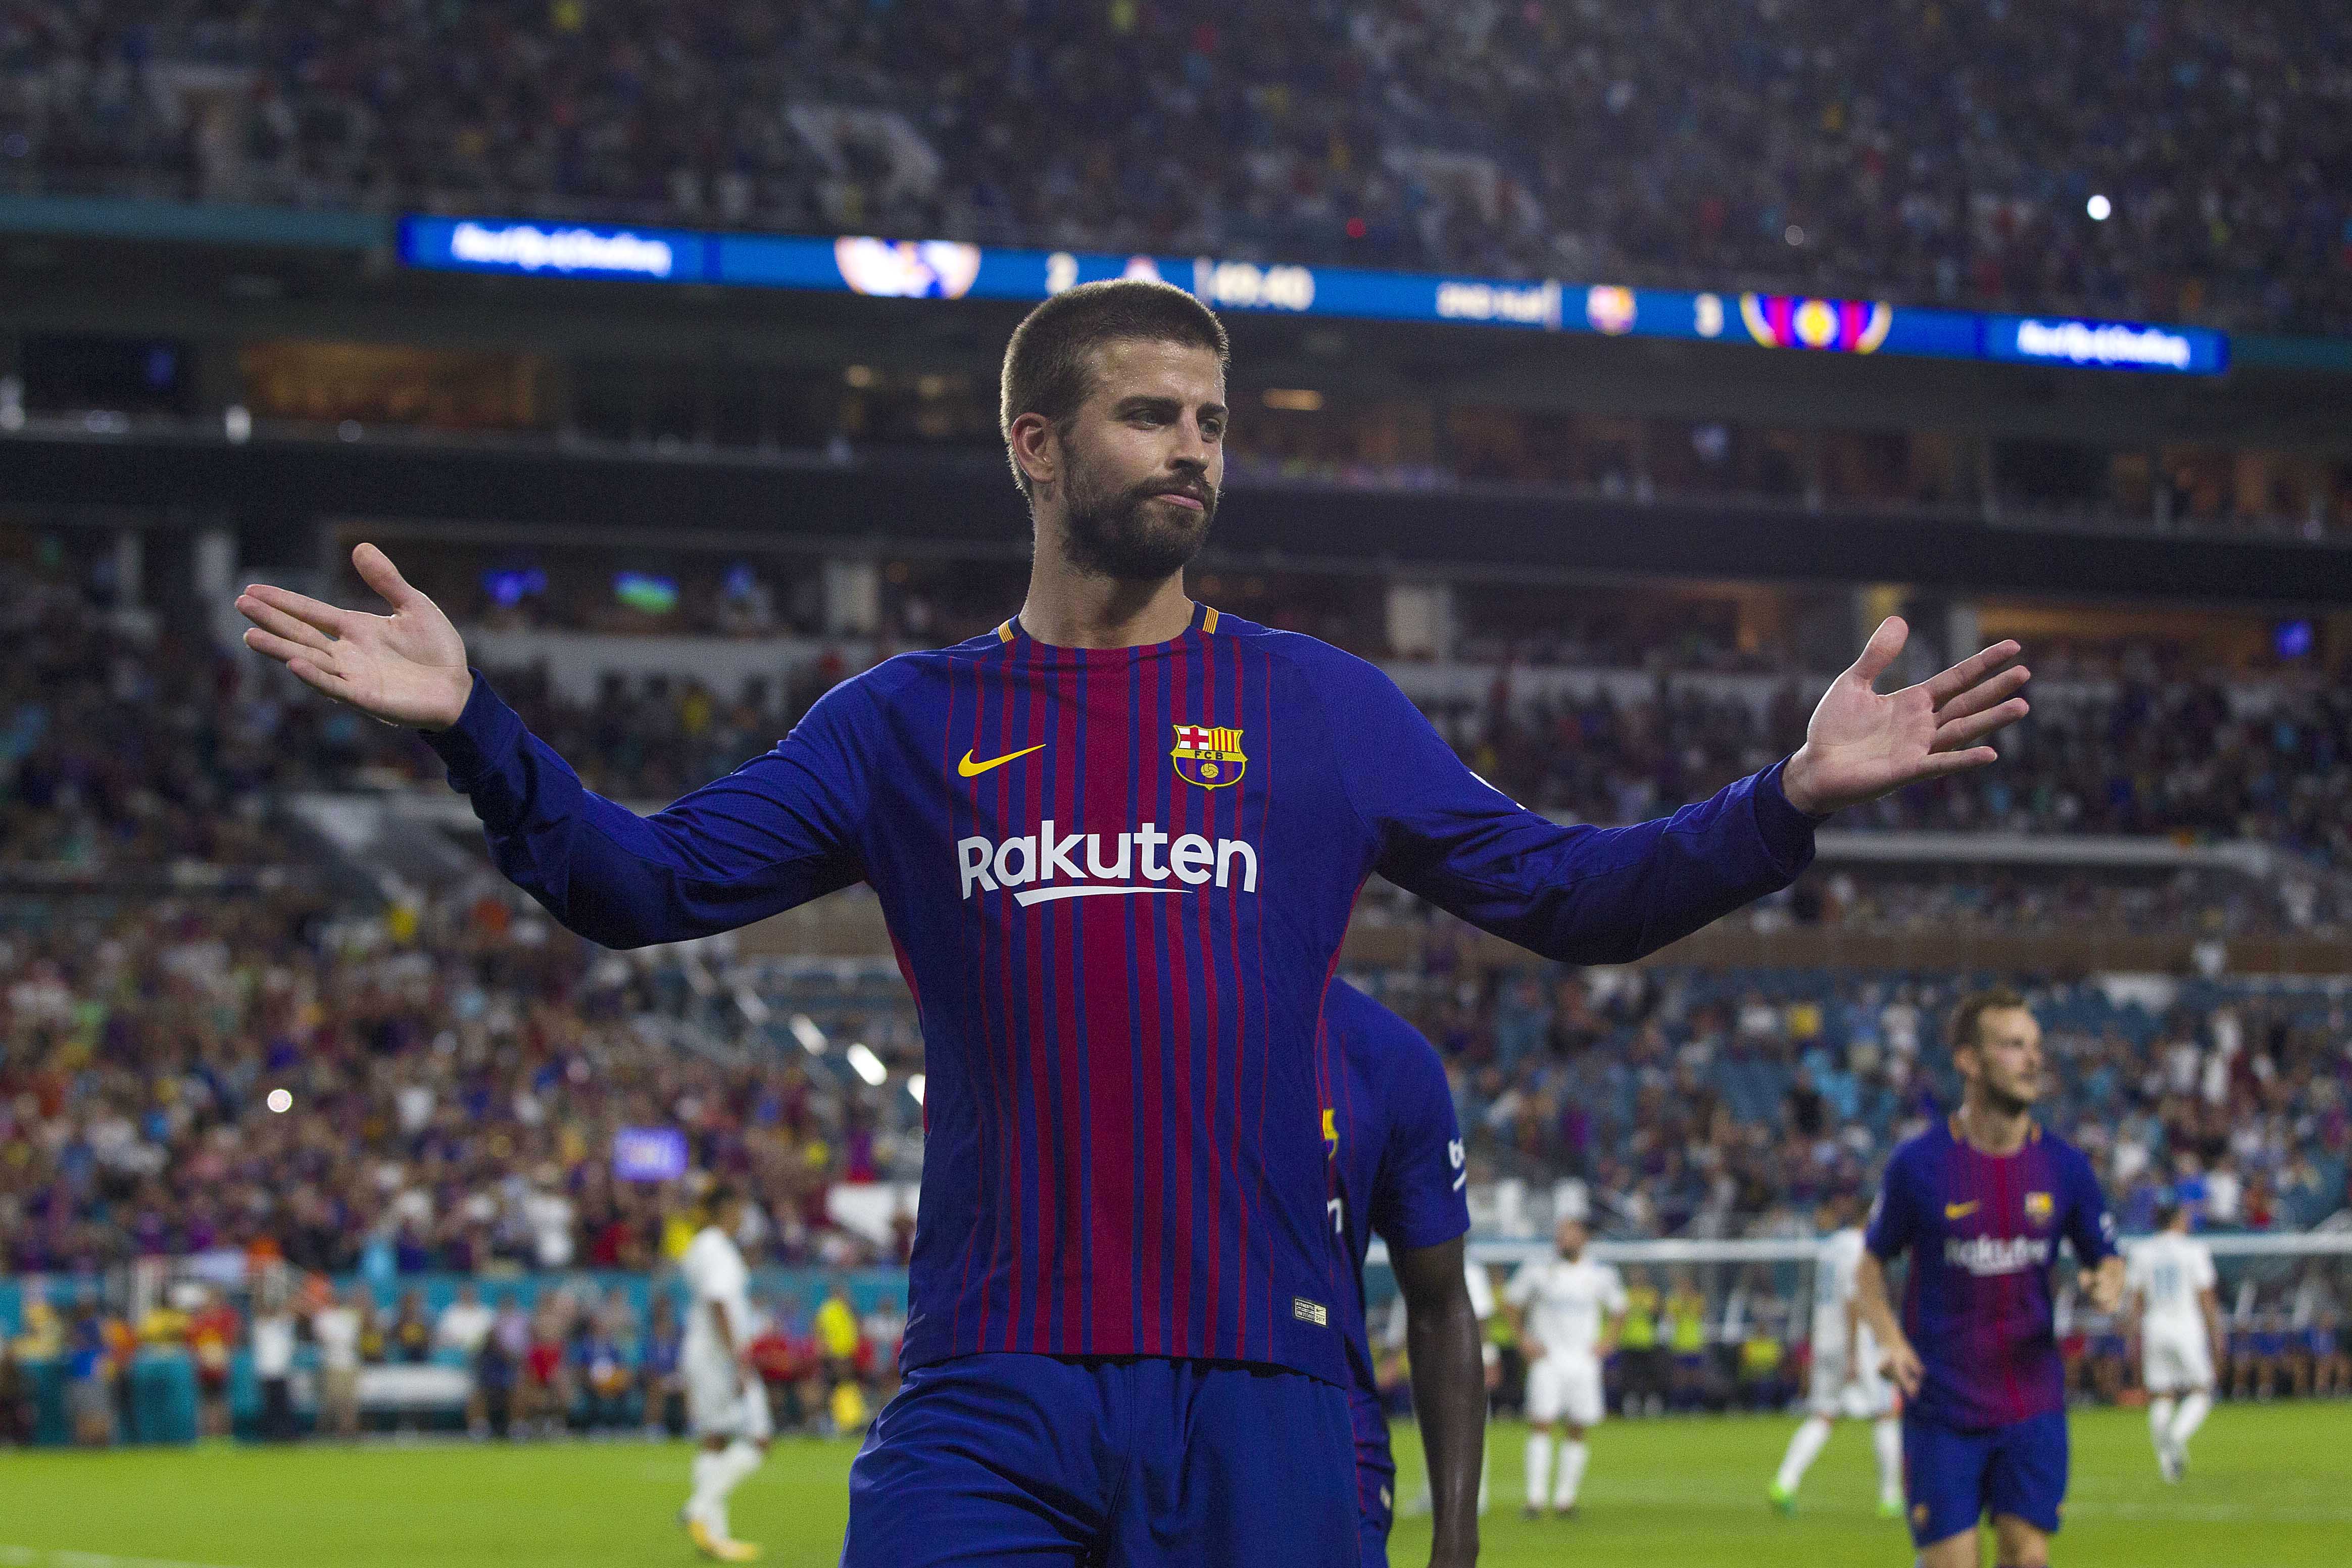 A goal from Piqué topples Real Madrid in the USA (2-3)